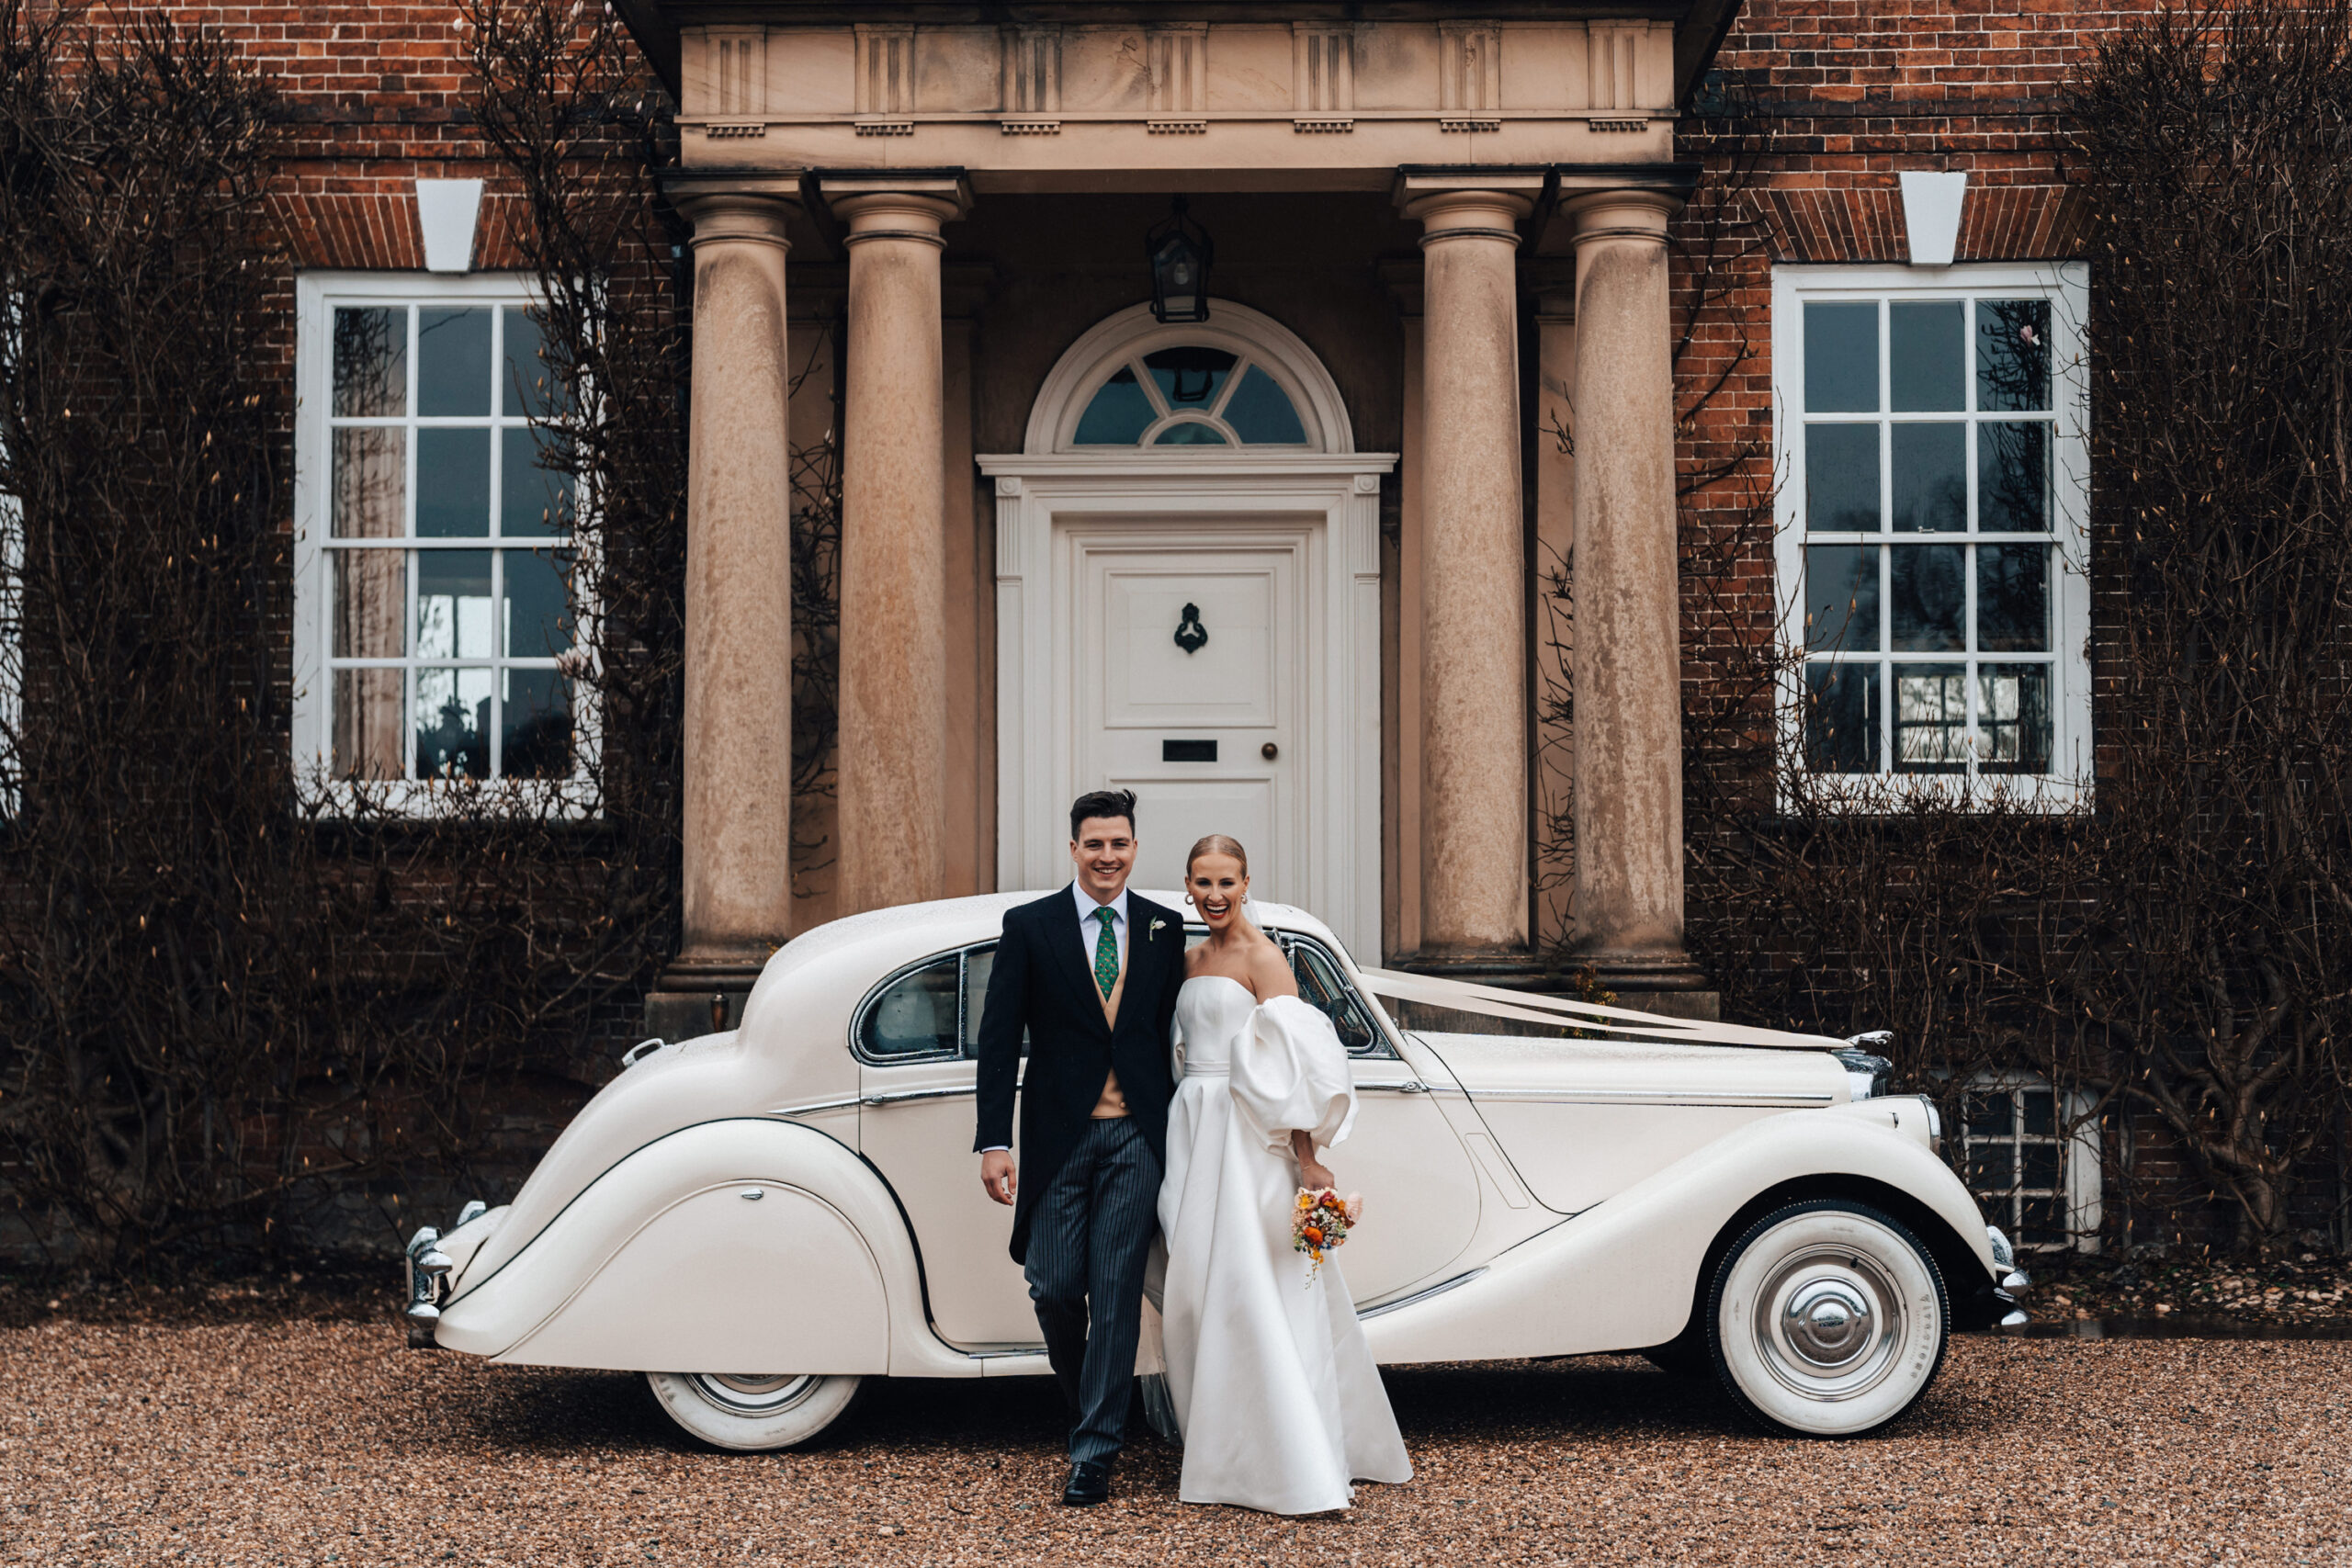 Bride and groom wearing a traditional morning suit and a modern voluminous wedding dress with large sleeves posing next to a traditional wedding car in front of a red brick Georgian Manor House